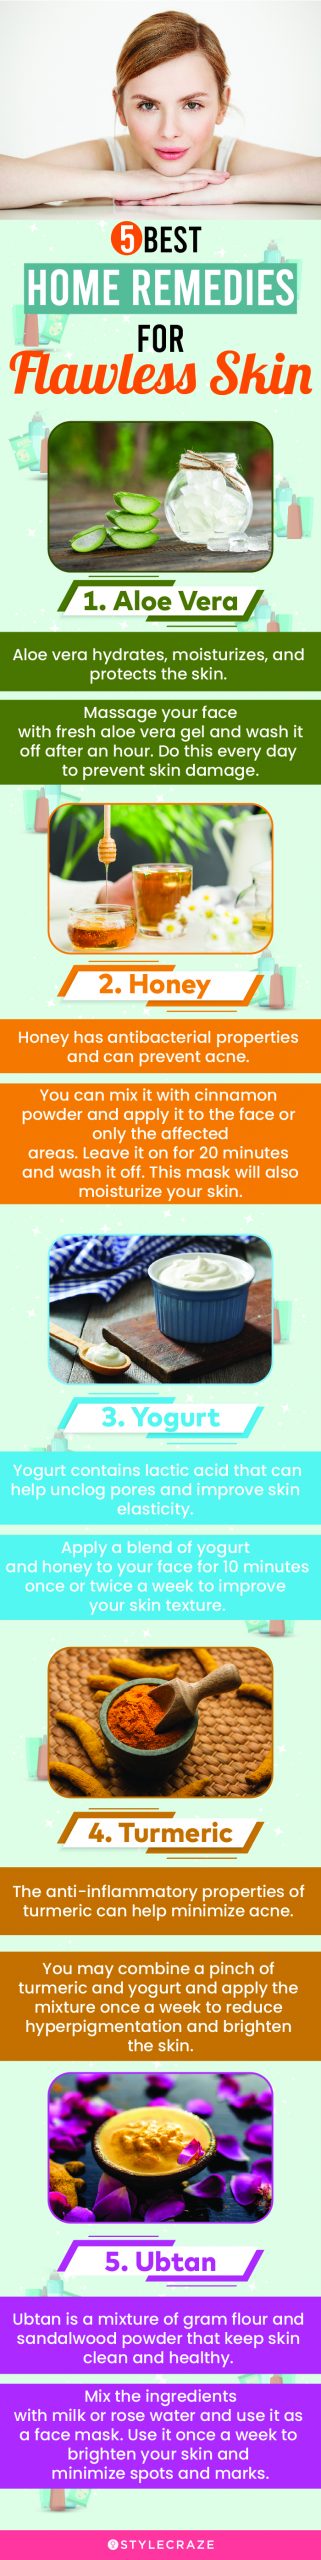 5 best home remediesfor flawless skin[infographic]